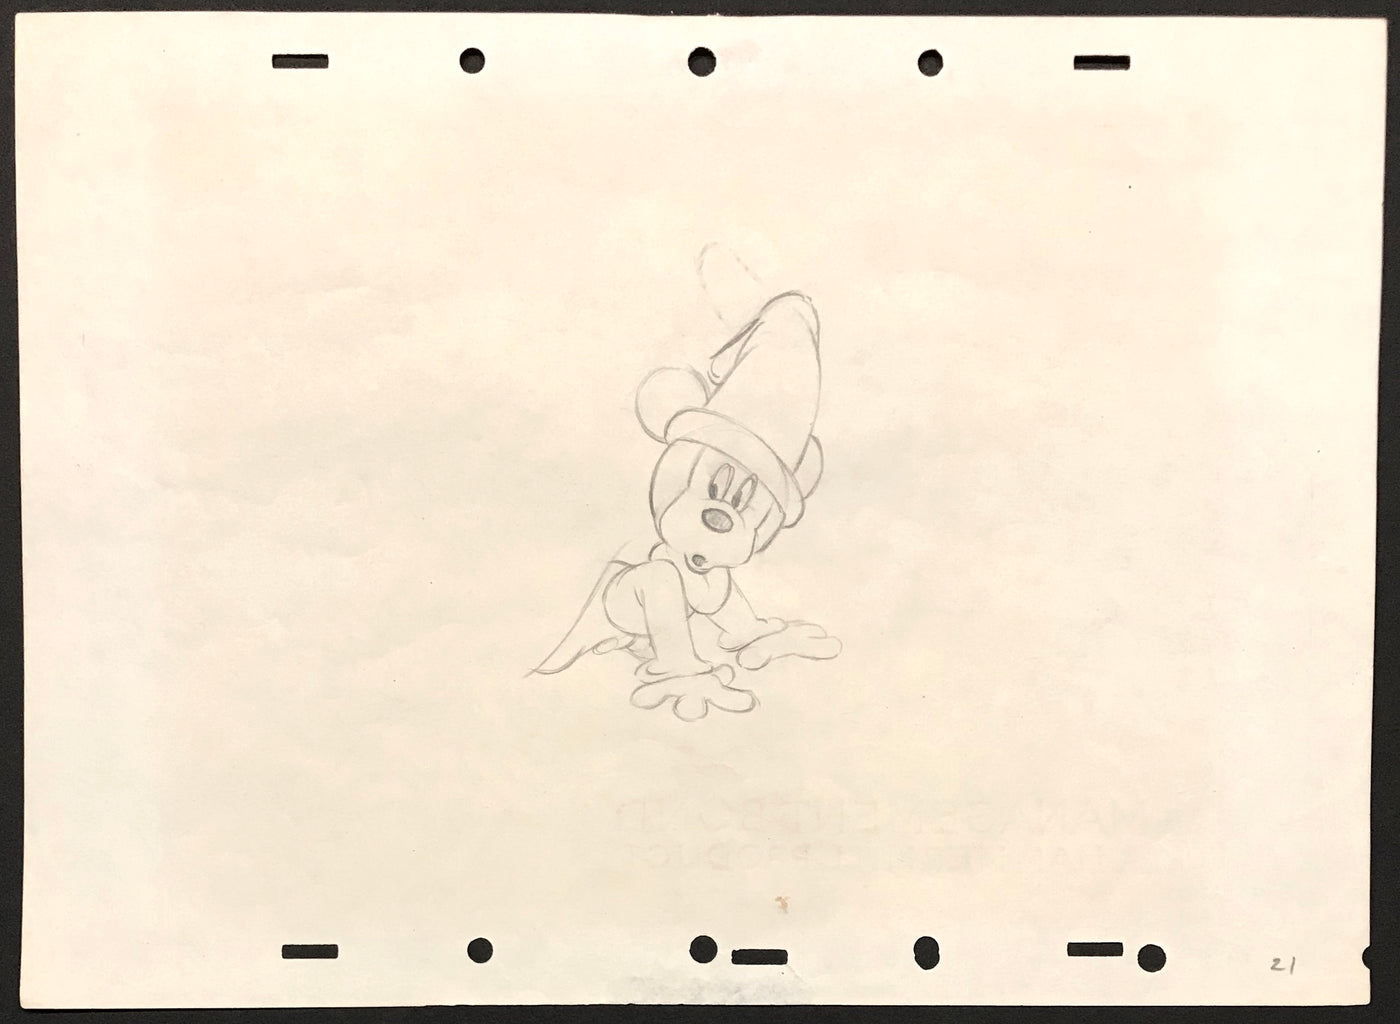 Original Walt Disney Production Drawing Featuring Mickey Mouse from Fantasia